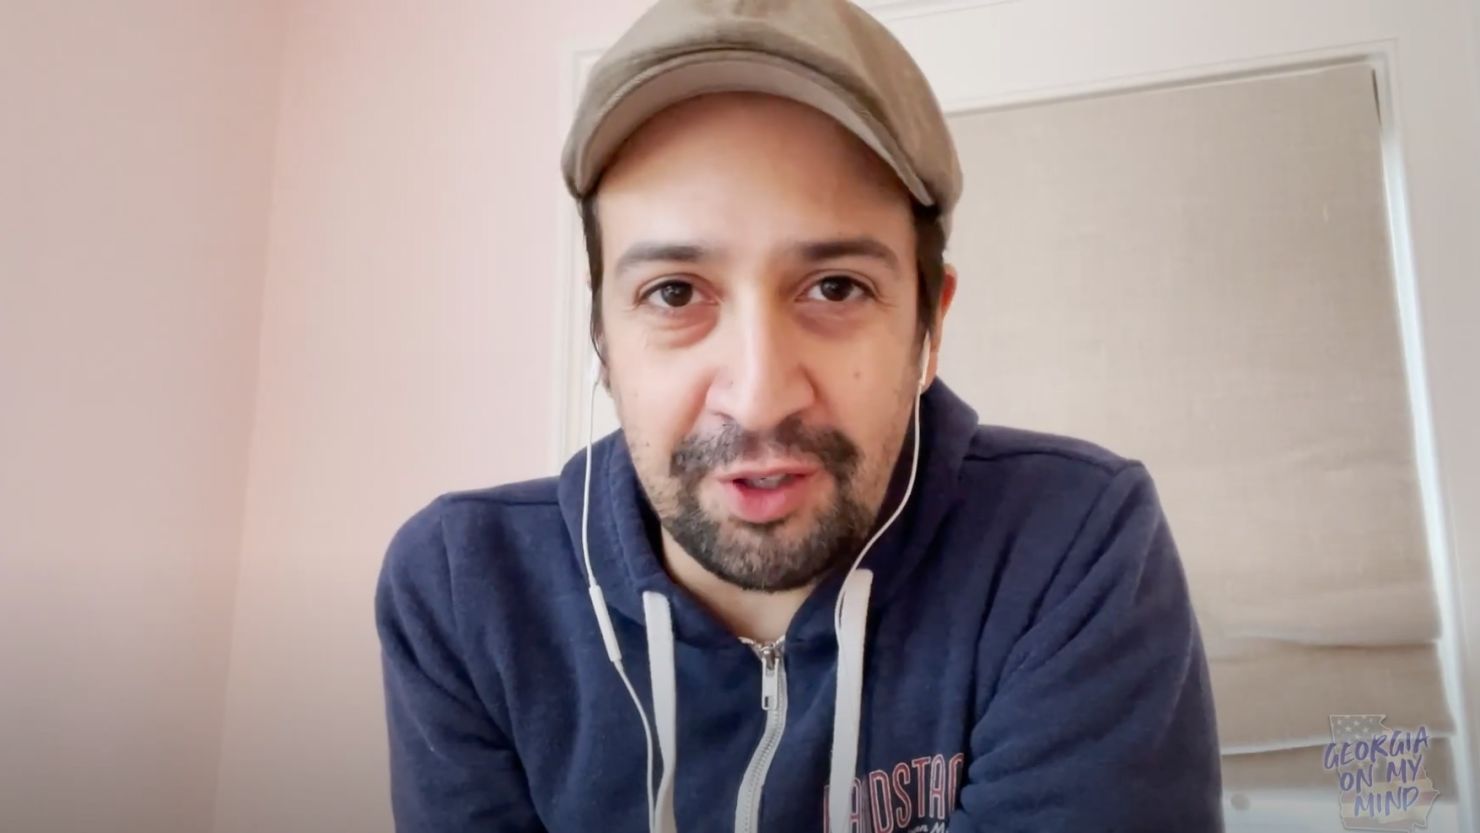 Lin-Manuel Miranda is among the many artists featured on the song "Georgia on my Mind."